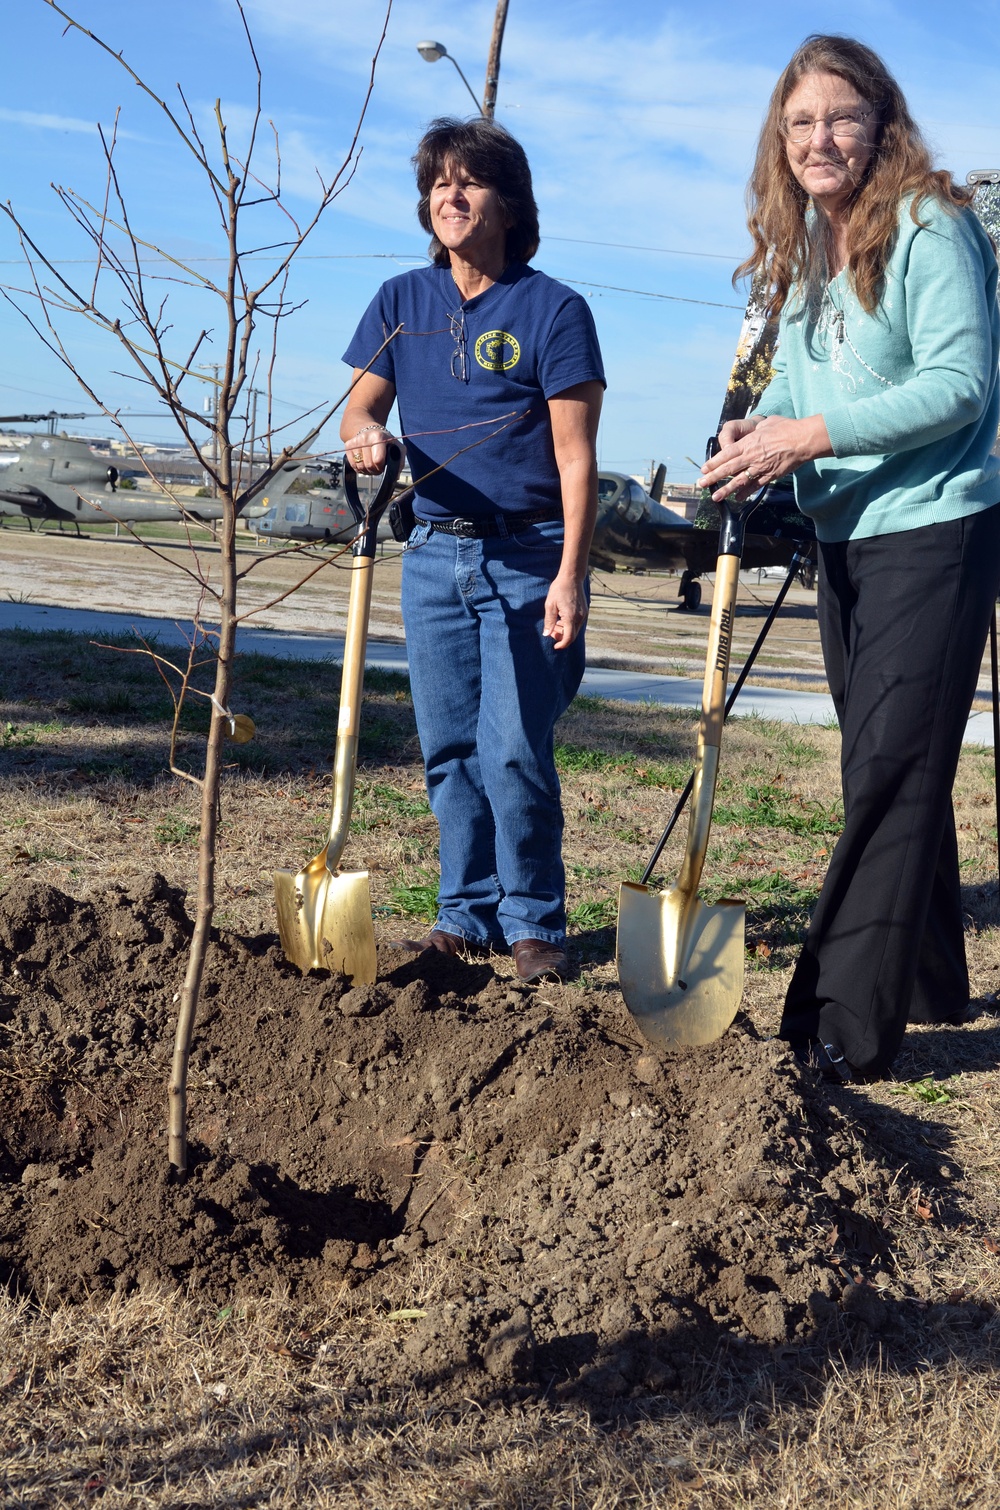 Community tree planting represents resiliency, strength